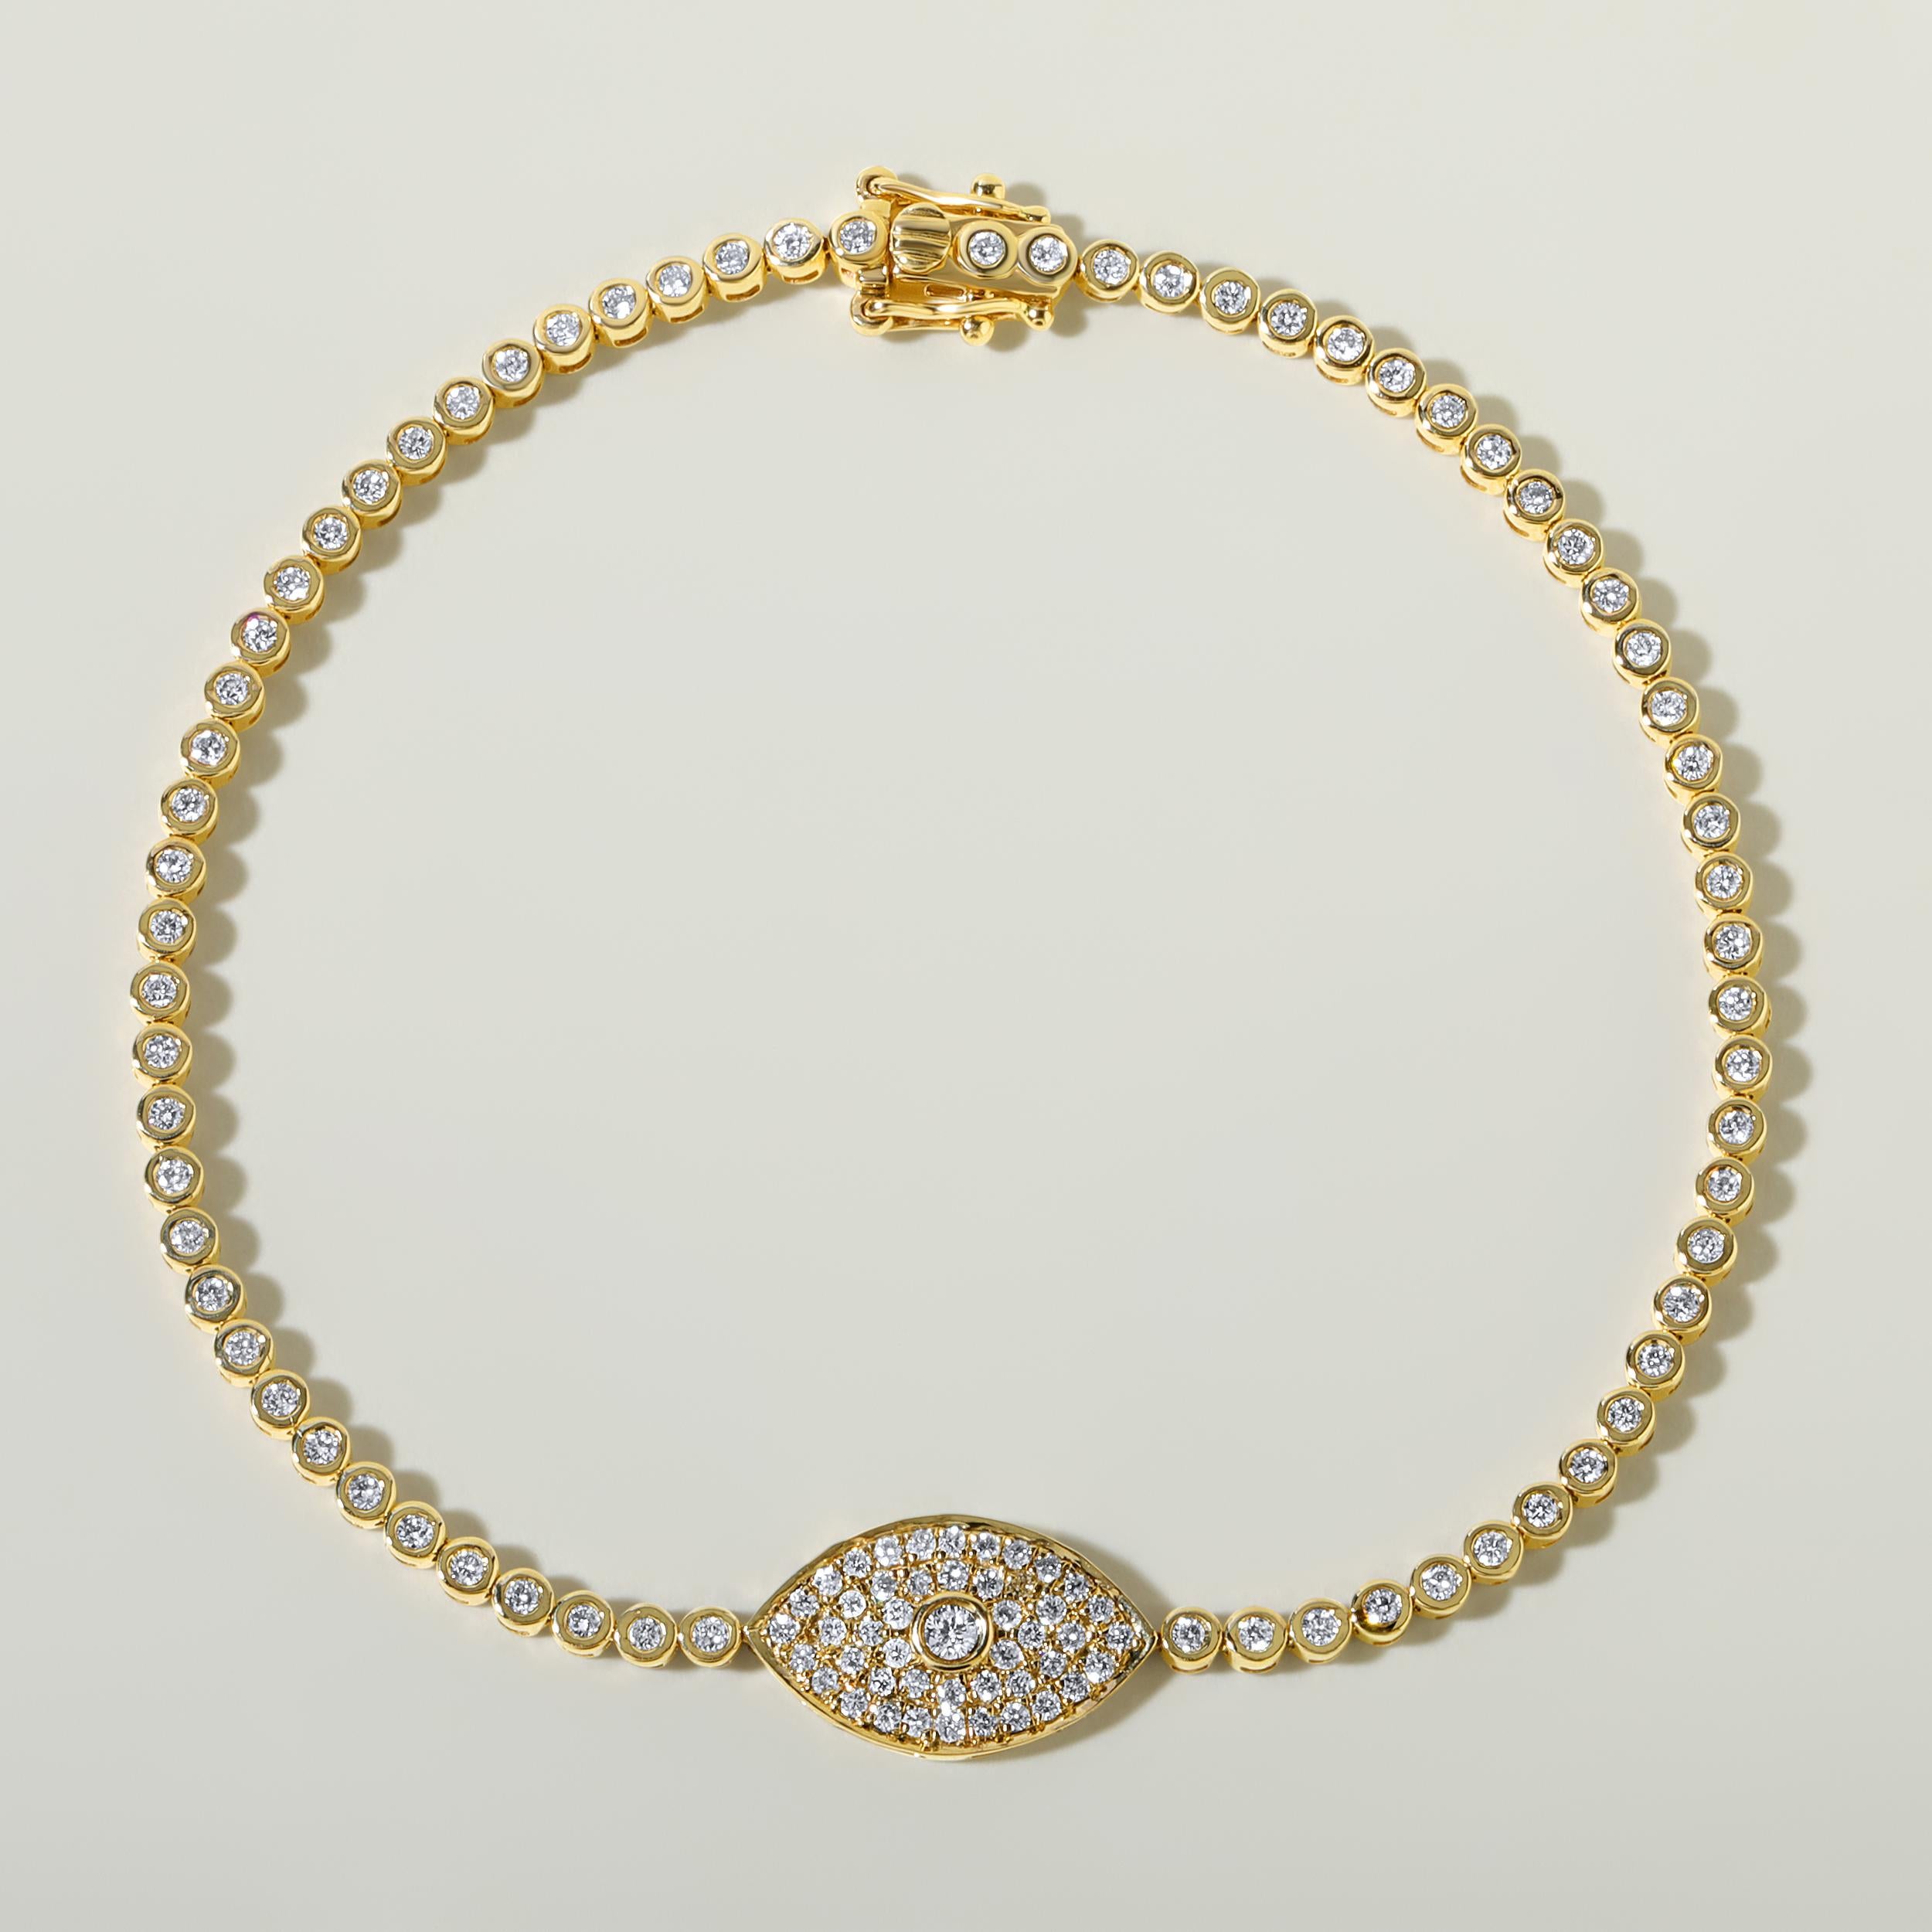 Crafted in 5.6 grams of 14K Yellow Gold, the bracelet contains 116 stones of Round Natural Diamonds with a total of 0.96 carat in E-F color and SI clarity. The bracelet length is 7 inches.

CONTEMPORARY AND TIMELESS ESSENCE: Crafted in